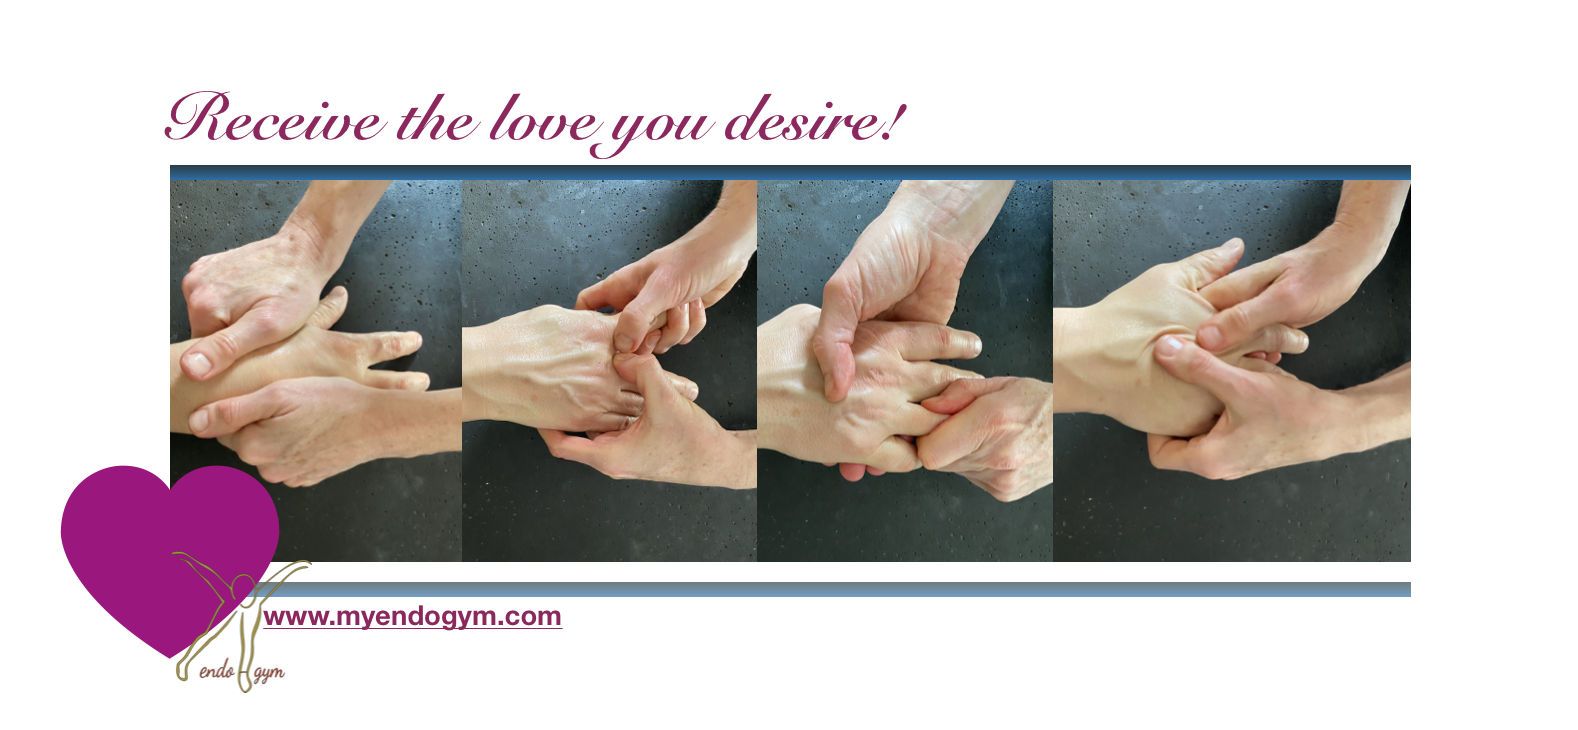 Receive the love You desire